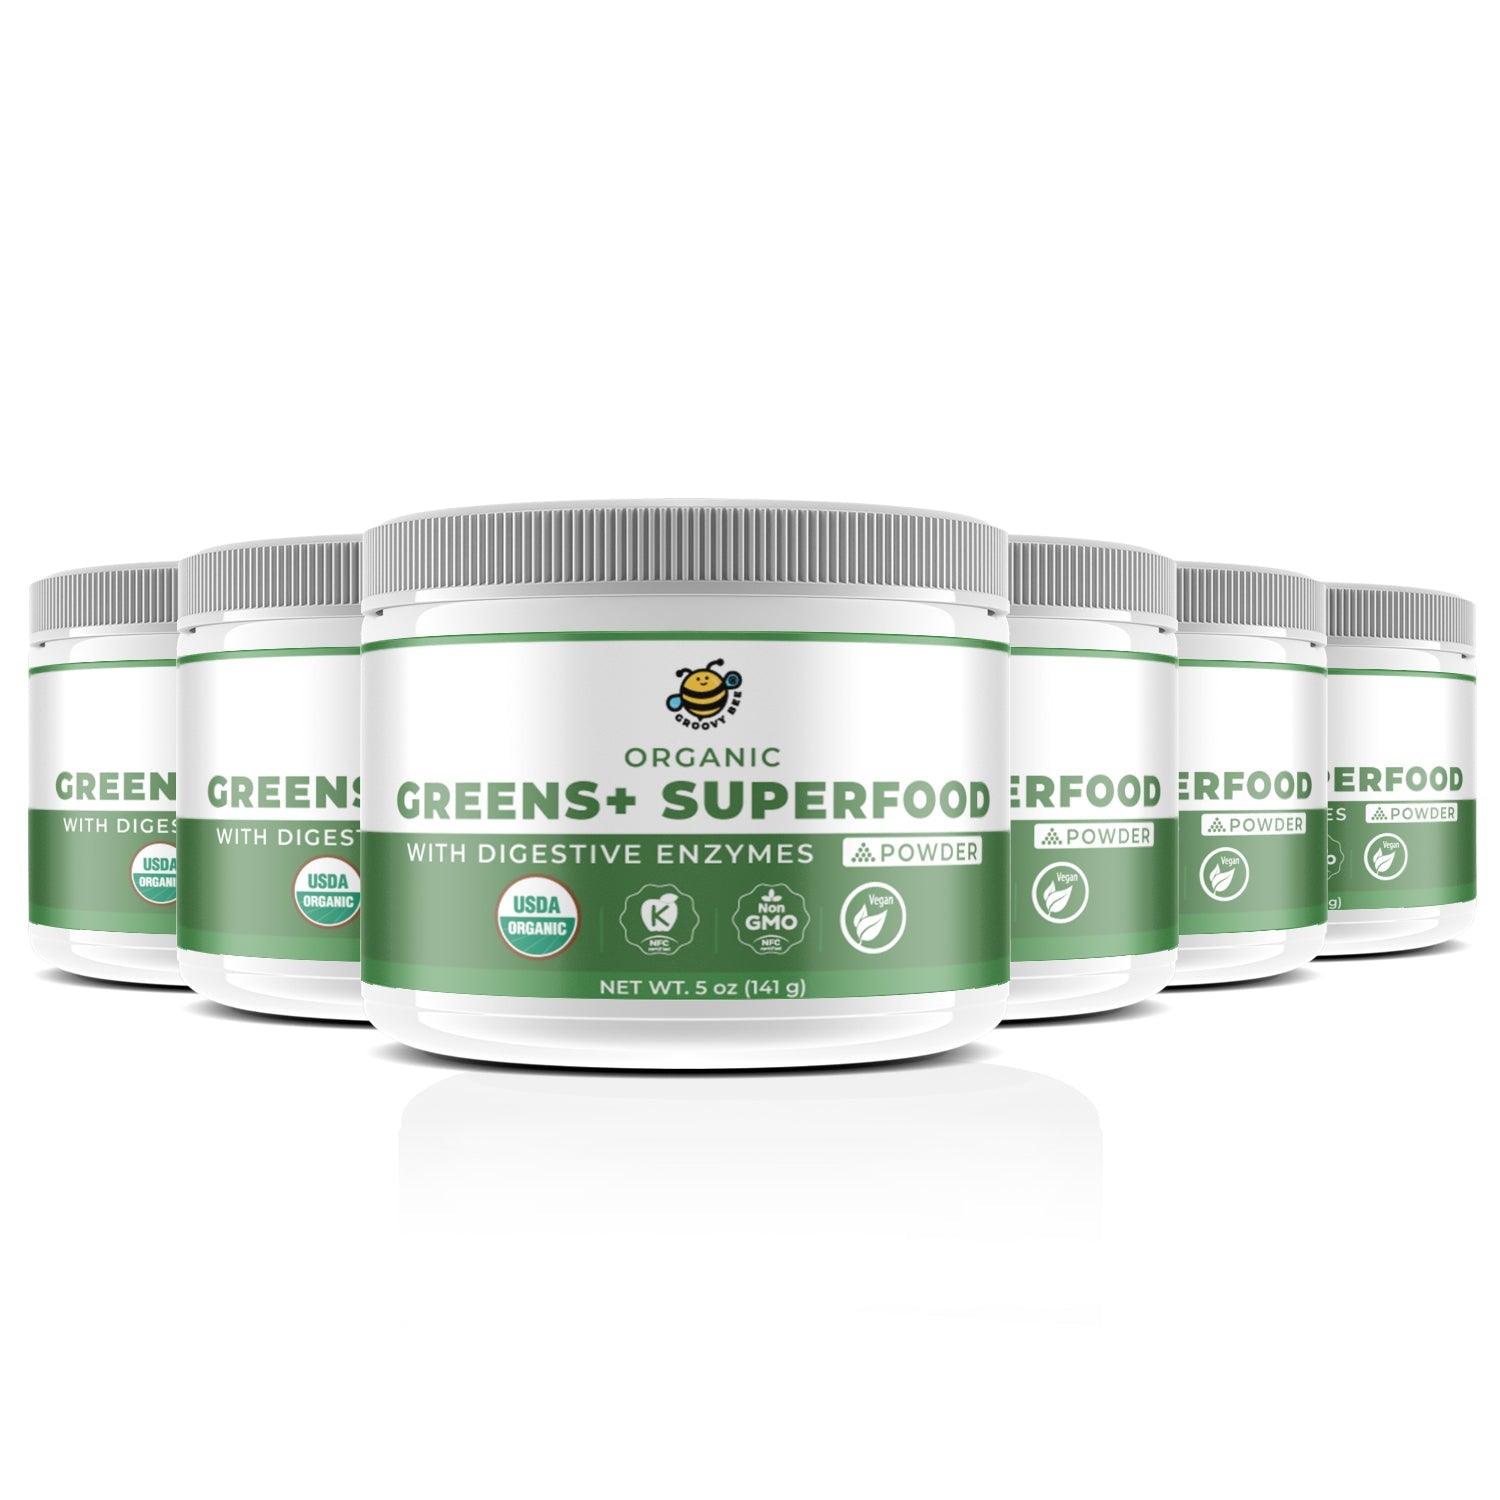 Organic Greens+ Superfood Powder With Digestive Enzymes 5 oz (141 g) (6-Pack)